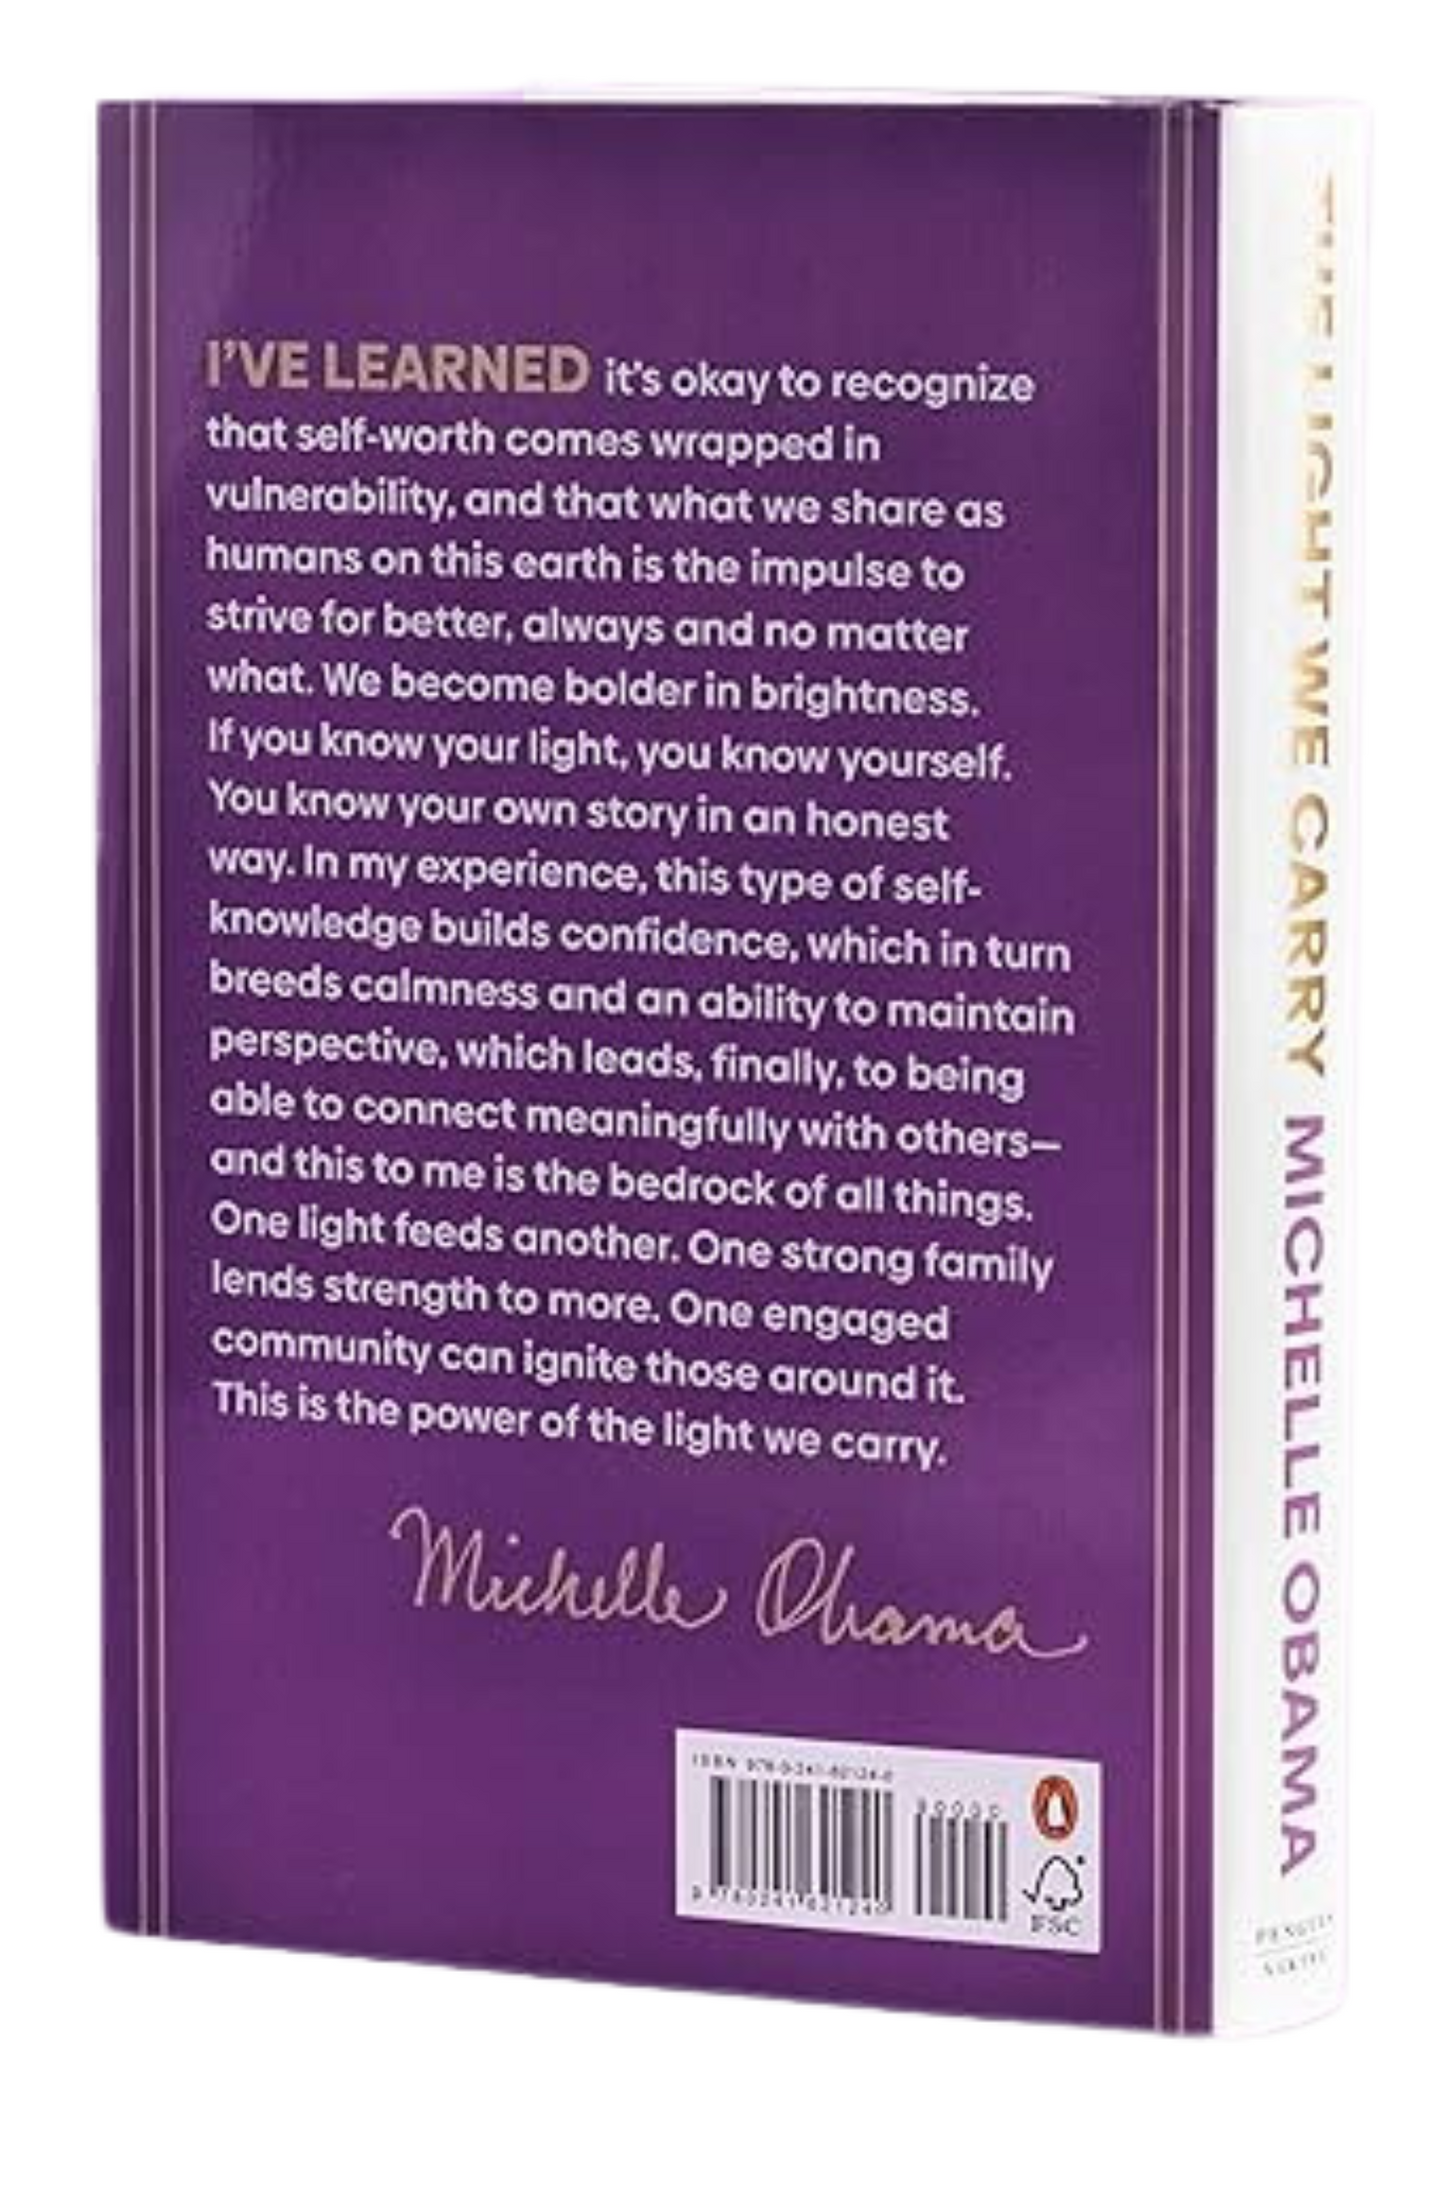 The Light We Carry by Michelle Obama at BIBLIONEPAL Bookstore